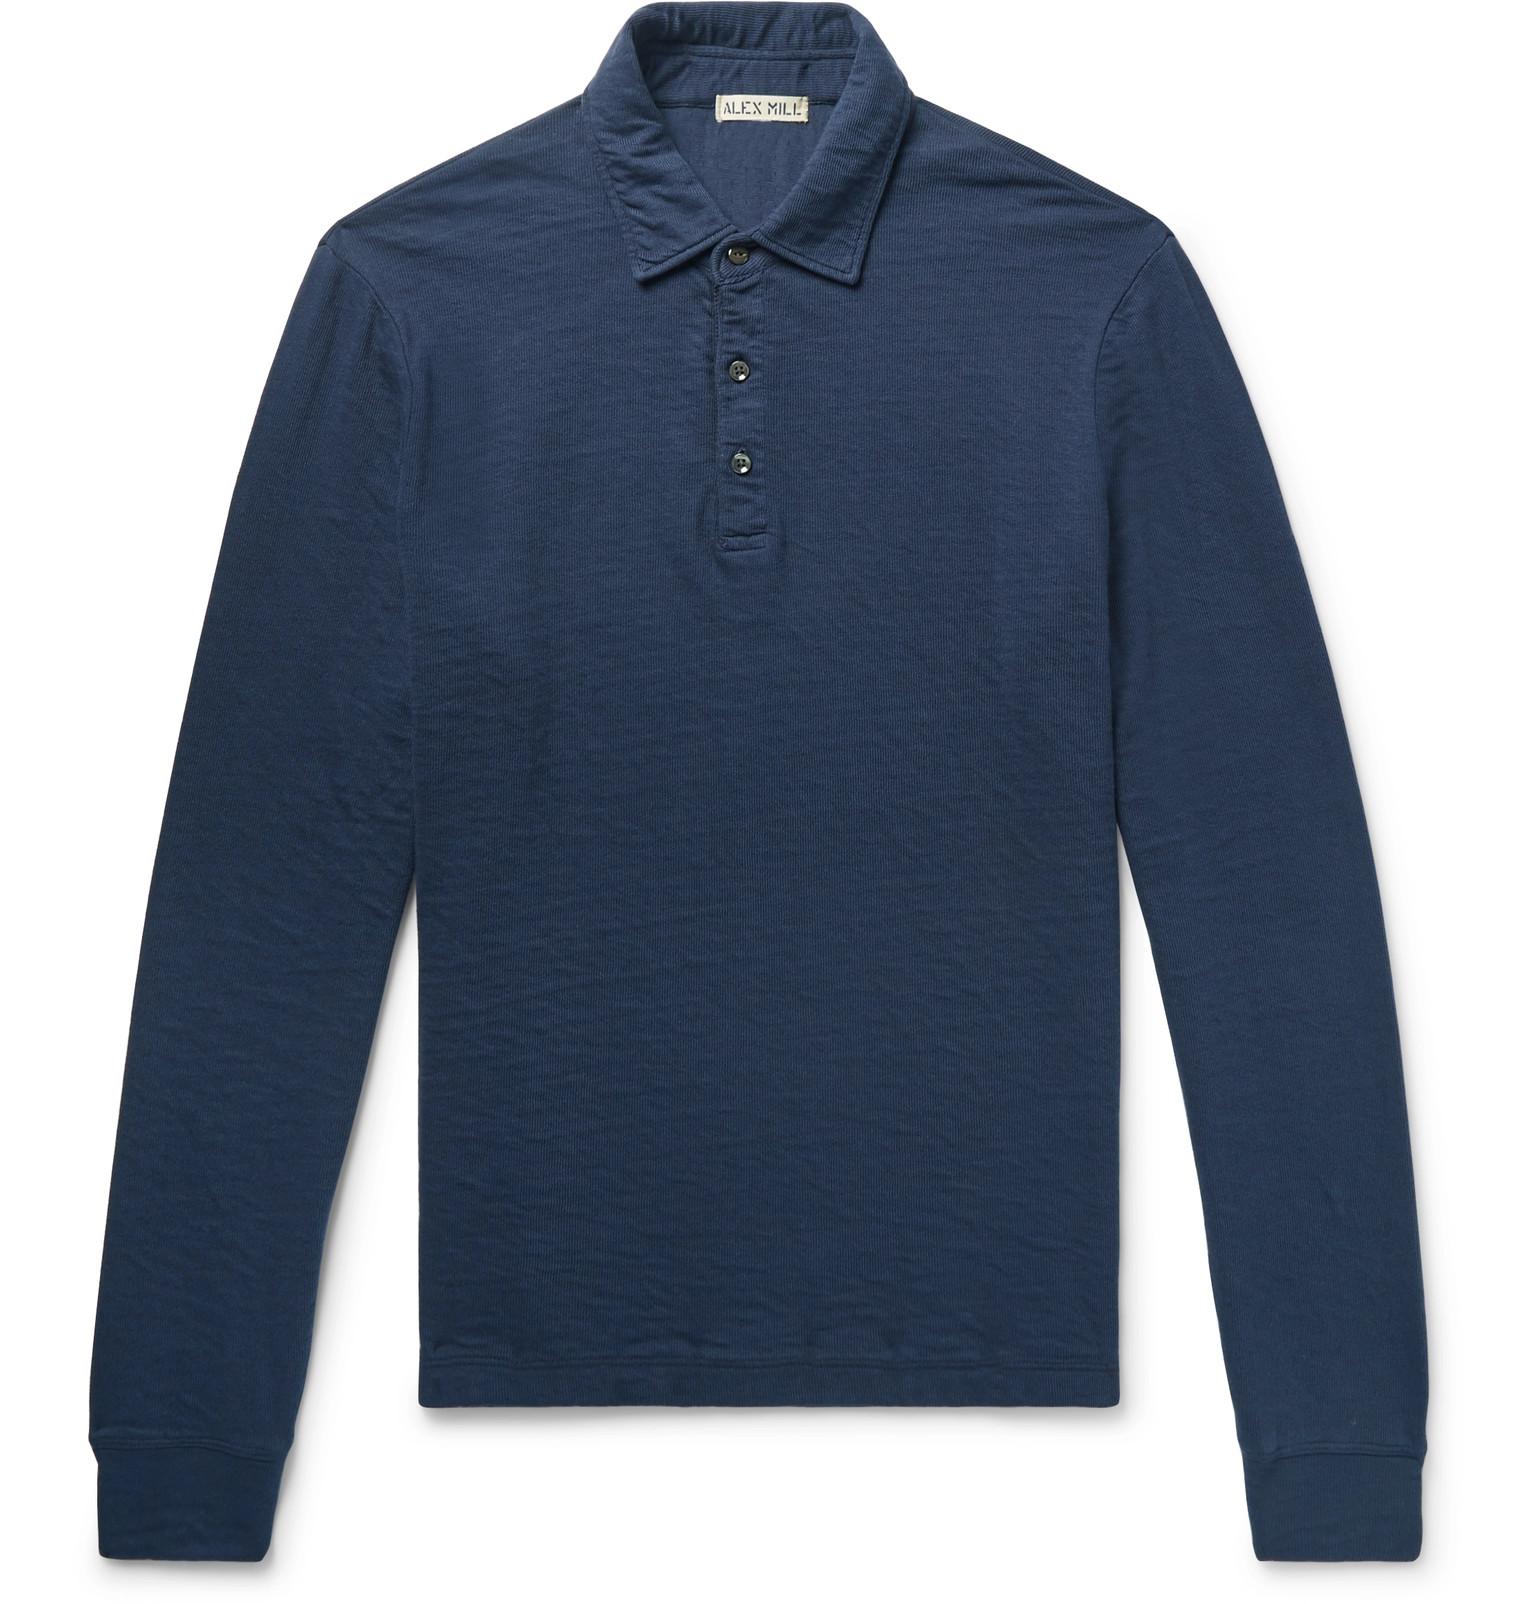 Alex Mill Double-faced Cotton Polo Shirt in Navy (Blue) for Men - Lyst